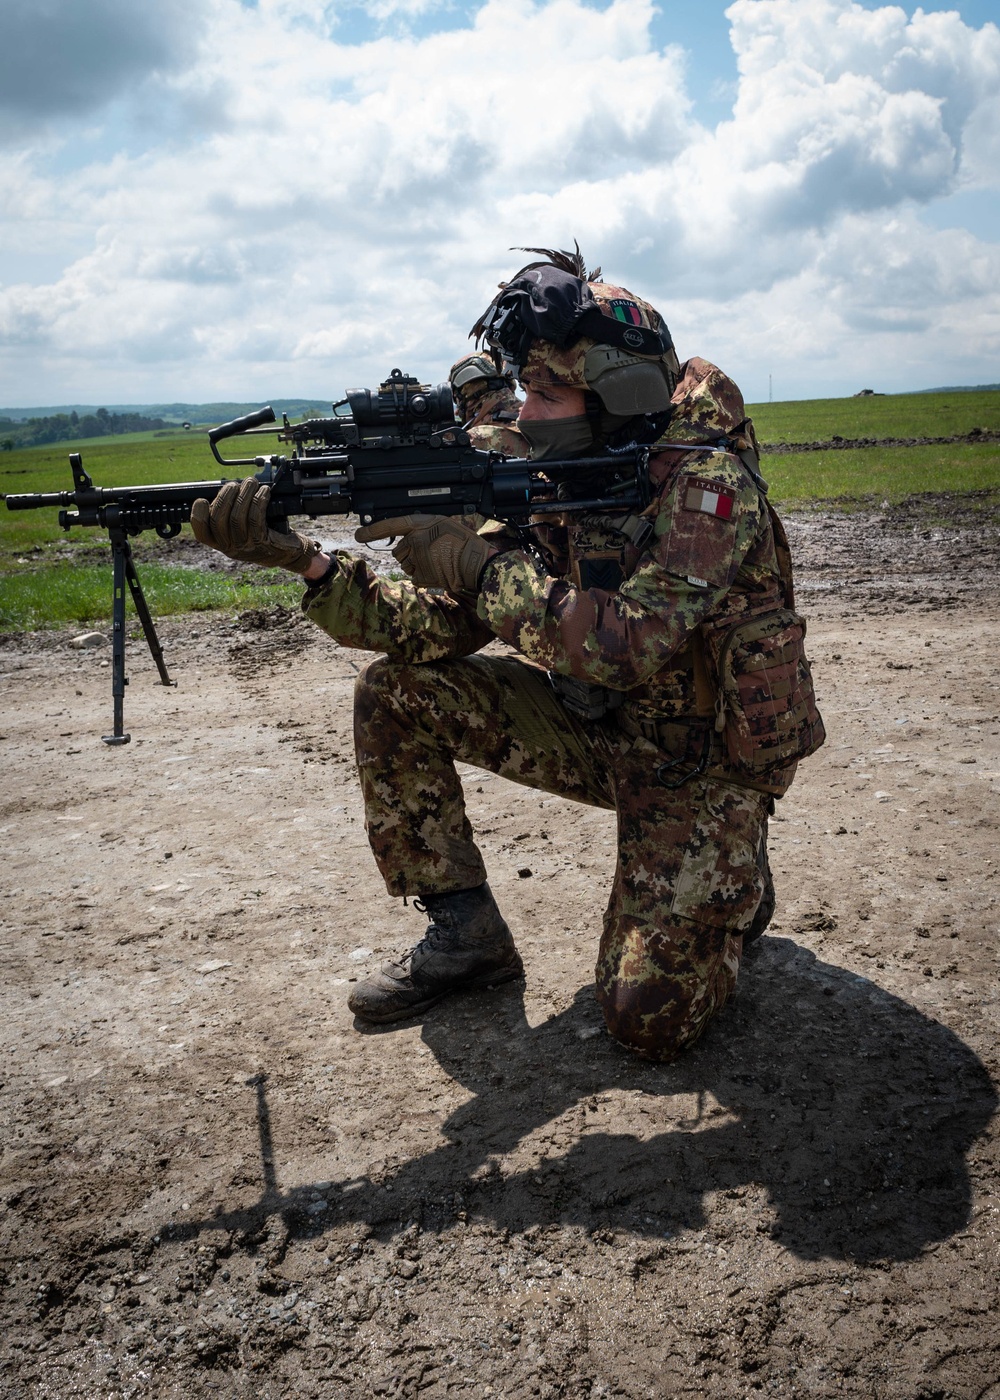 An Italian Soldier assigned to the 1st Mechanized Battalion ‘Bersaglieri’ hold their position while conducting reconnaissance training during Exercise Steadfast Defender 2021 in Romania.